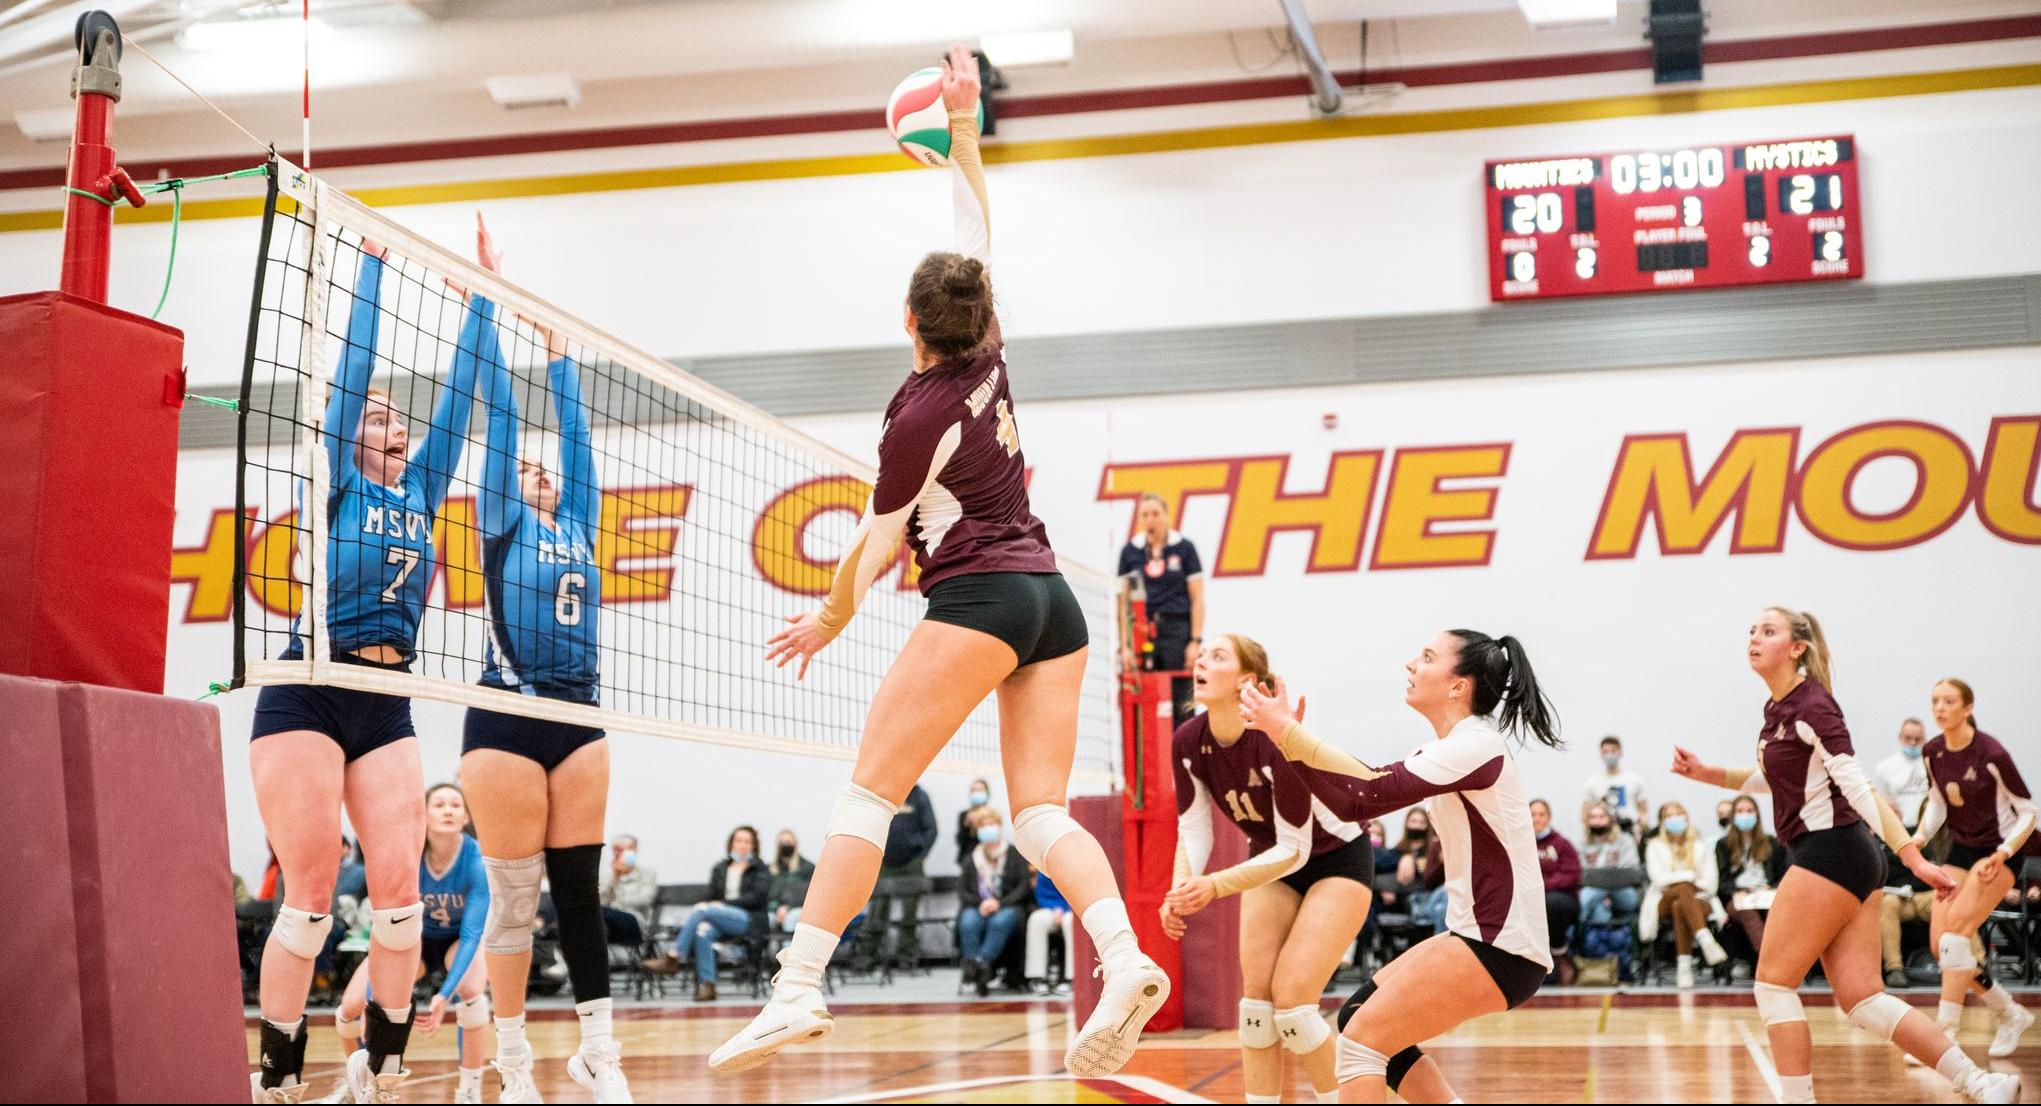 Mounties suffer loss in exciting match with Mystics